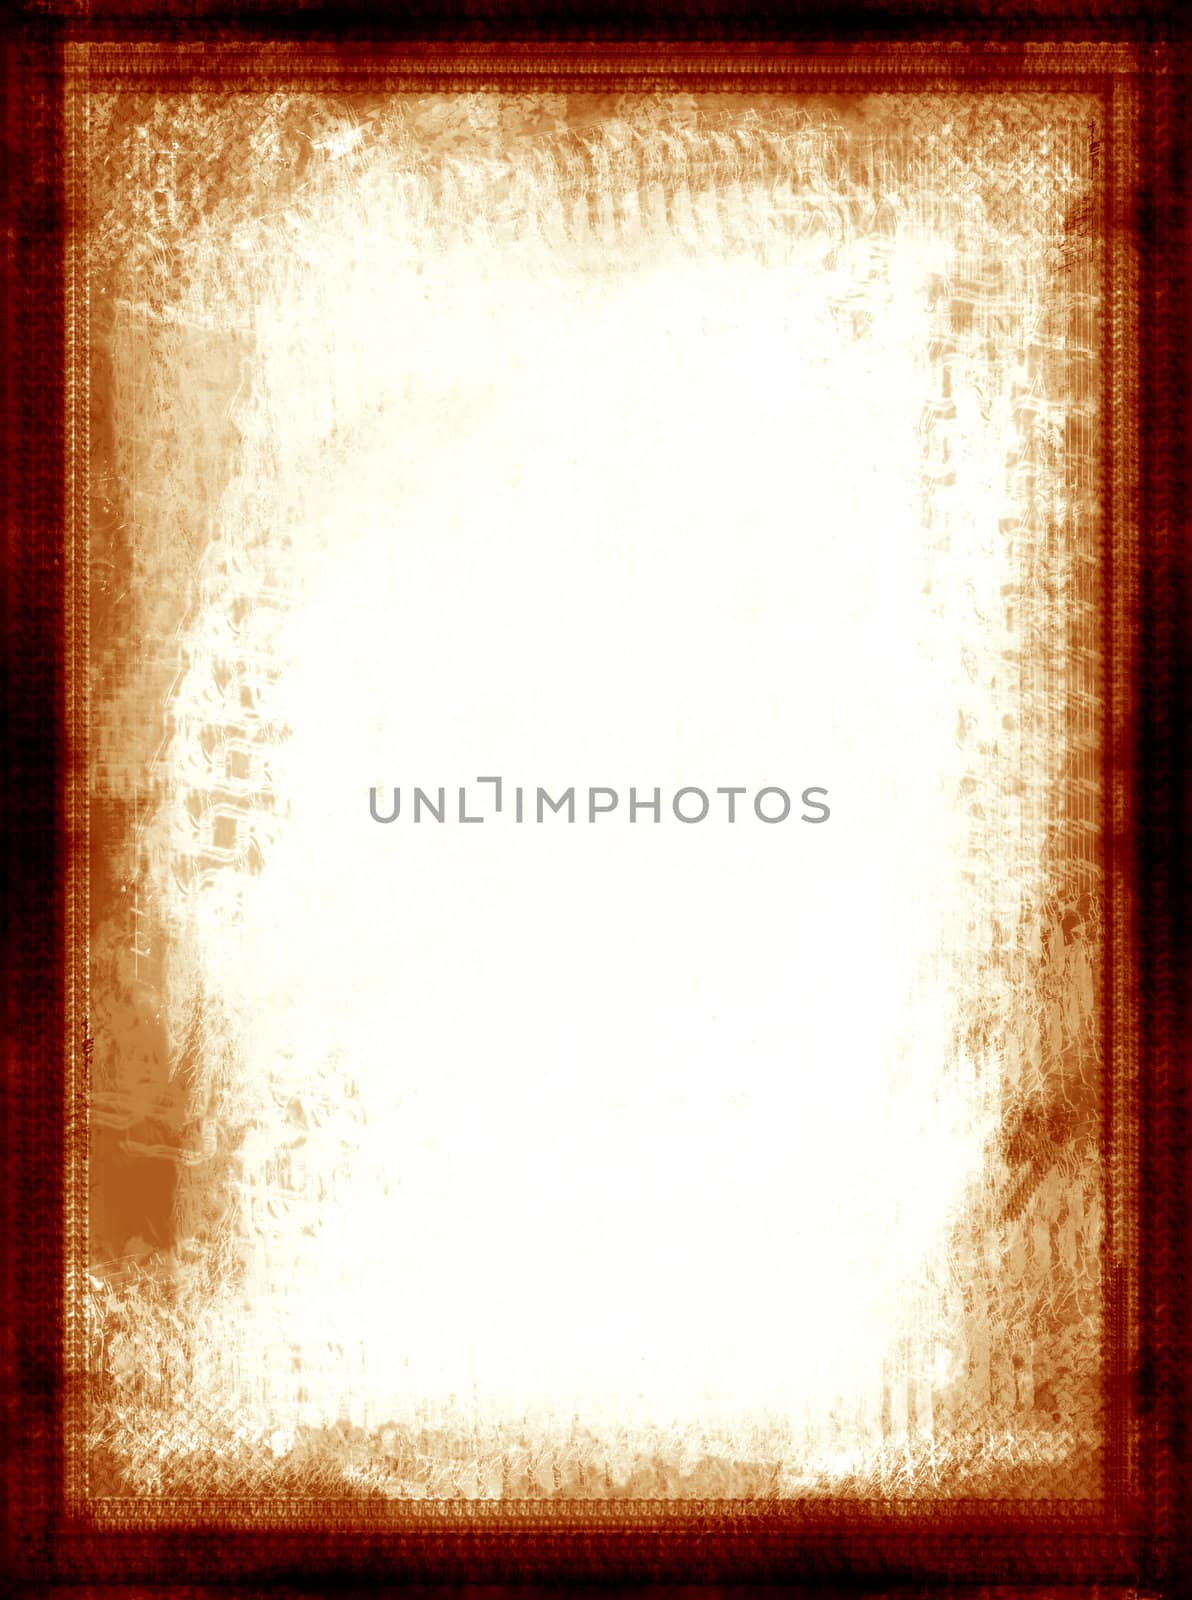 Computer designed highly detailed grunge textured border and background with space for your text or image